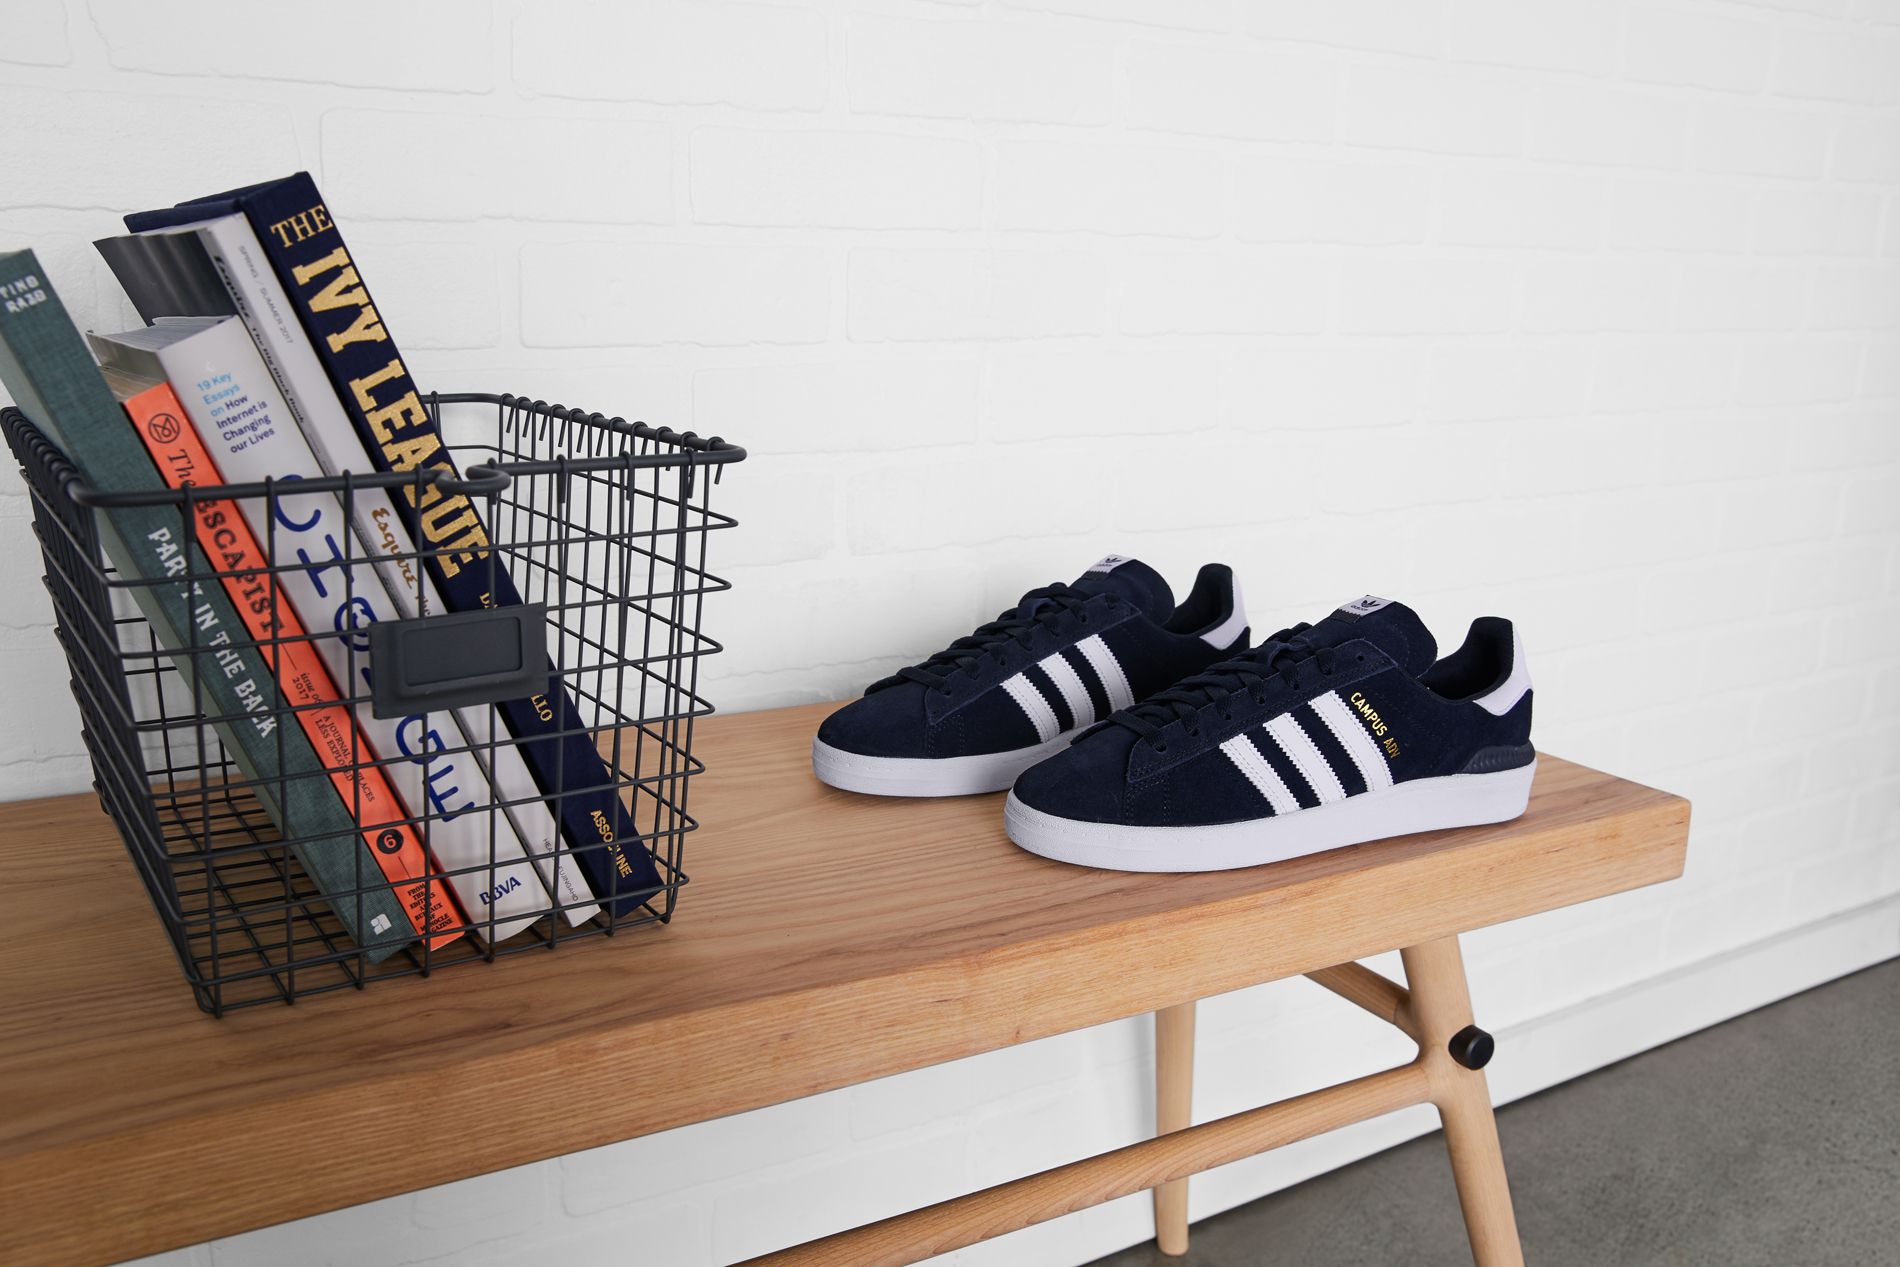 The Adidas Campus ADV Is a Modern Riff on a Classic Sneaker